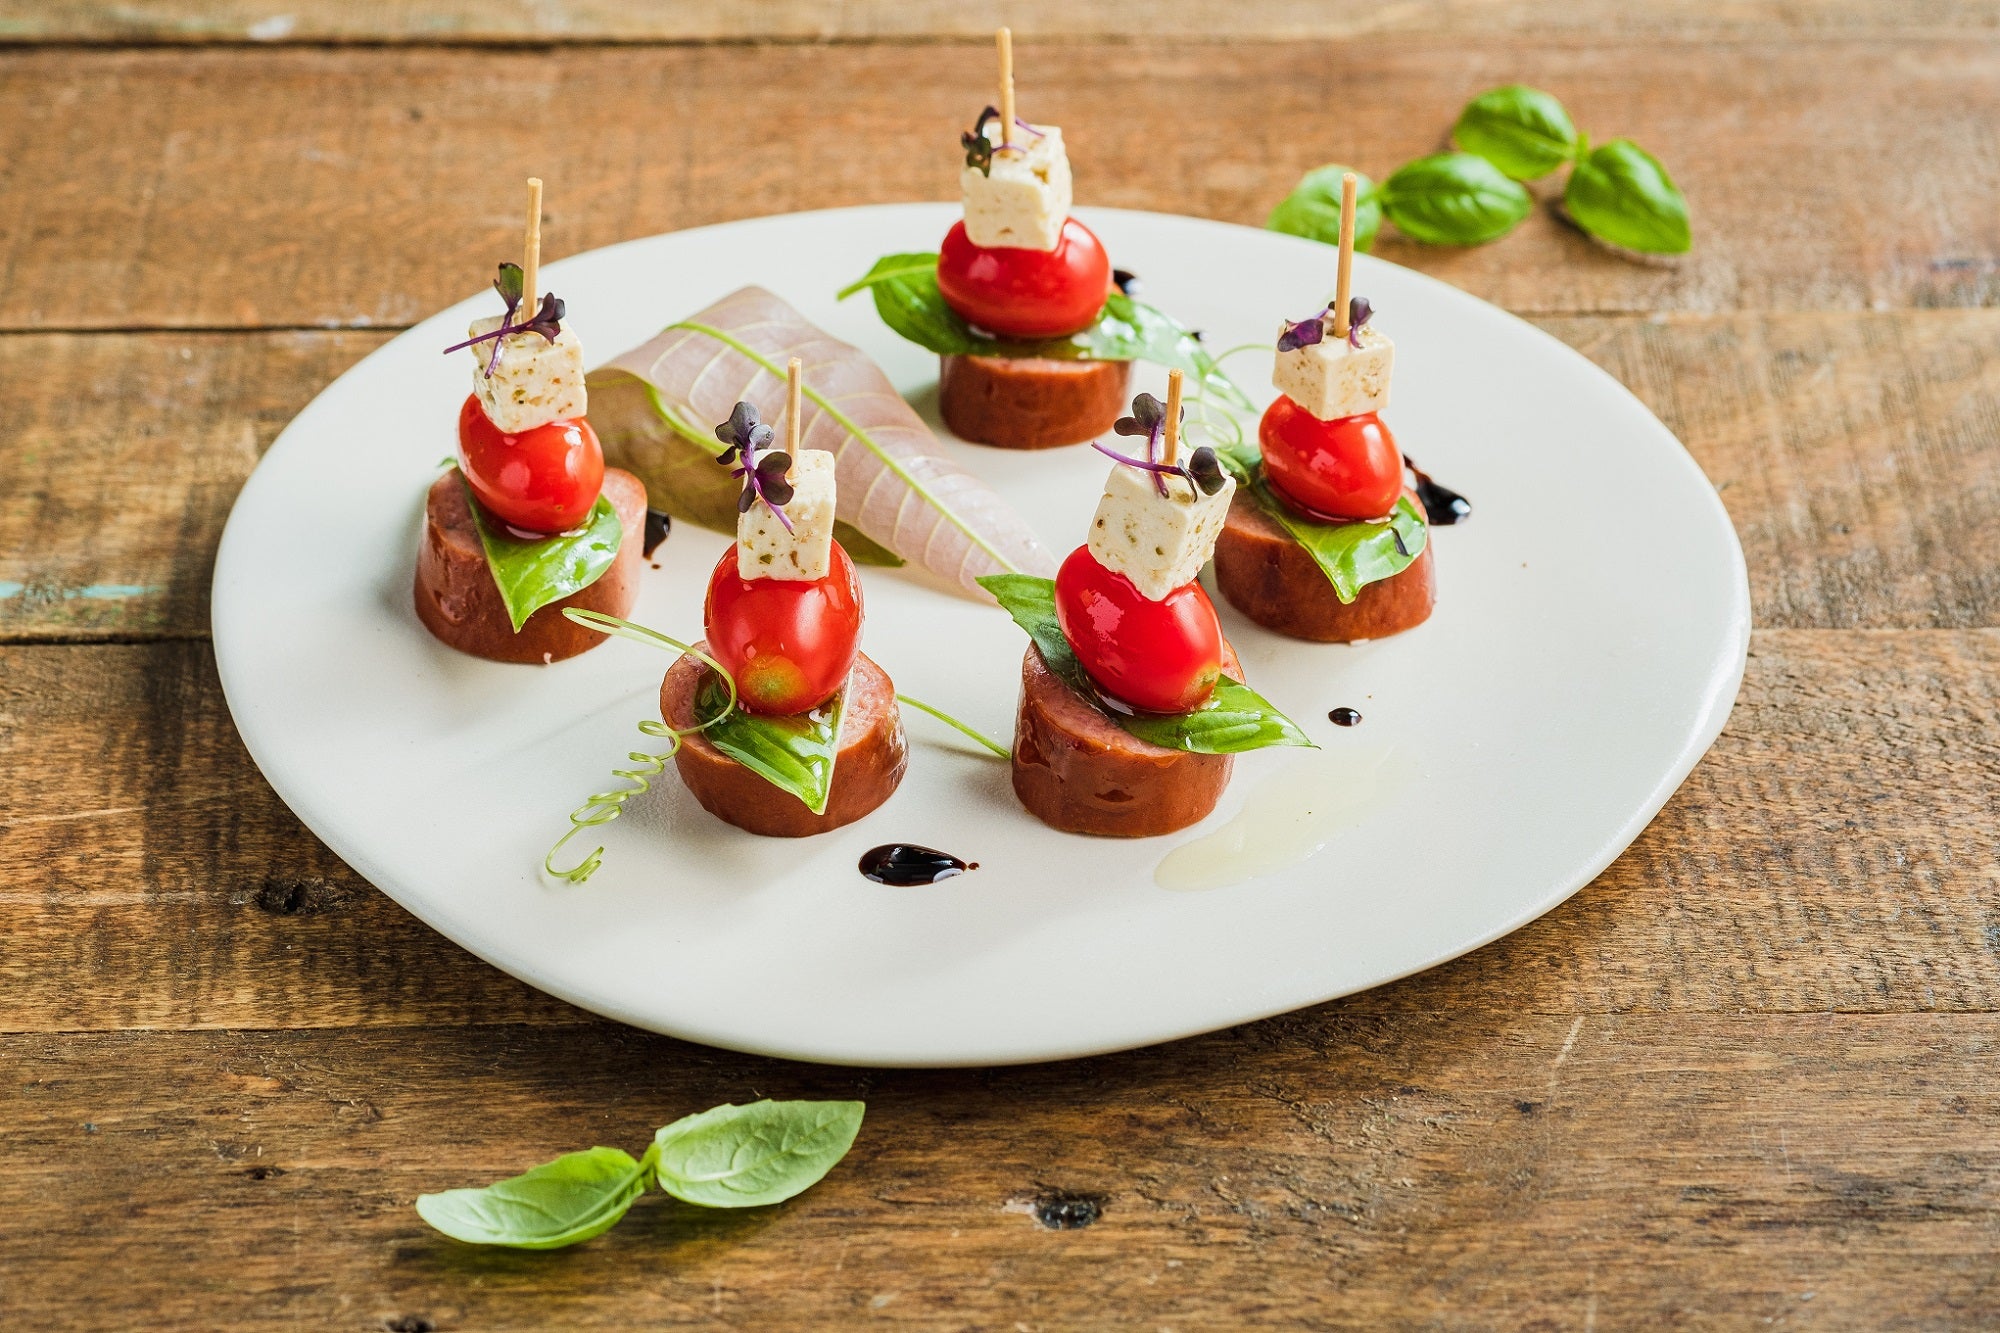 Canapé of Hungarian Sausage, Mozzarella, and Cherry Tomatoes